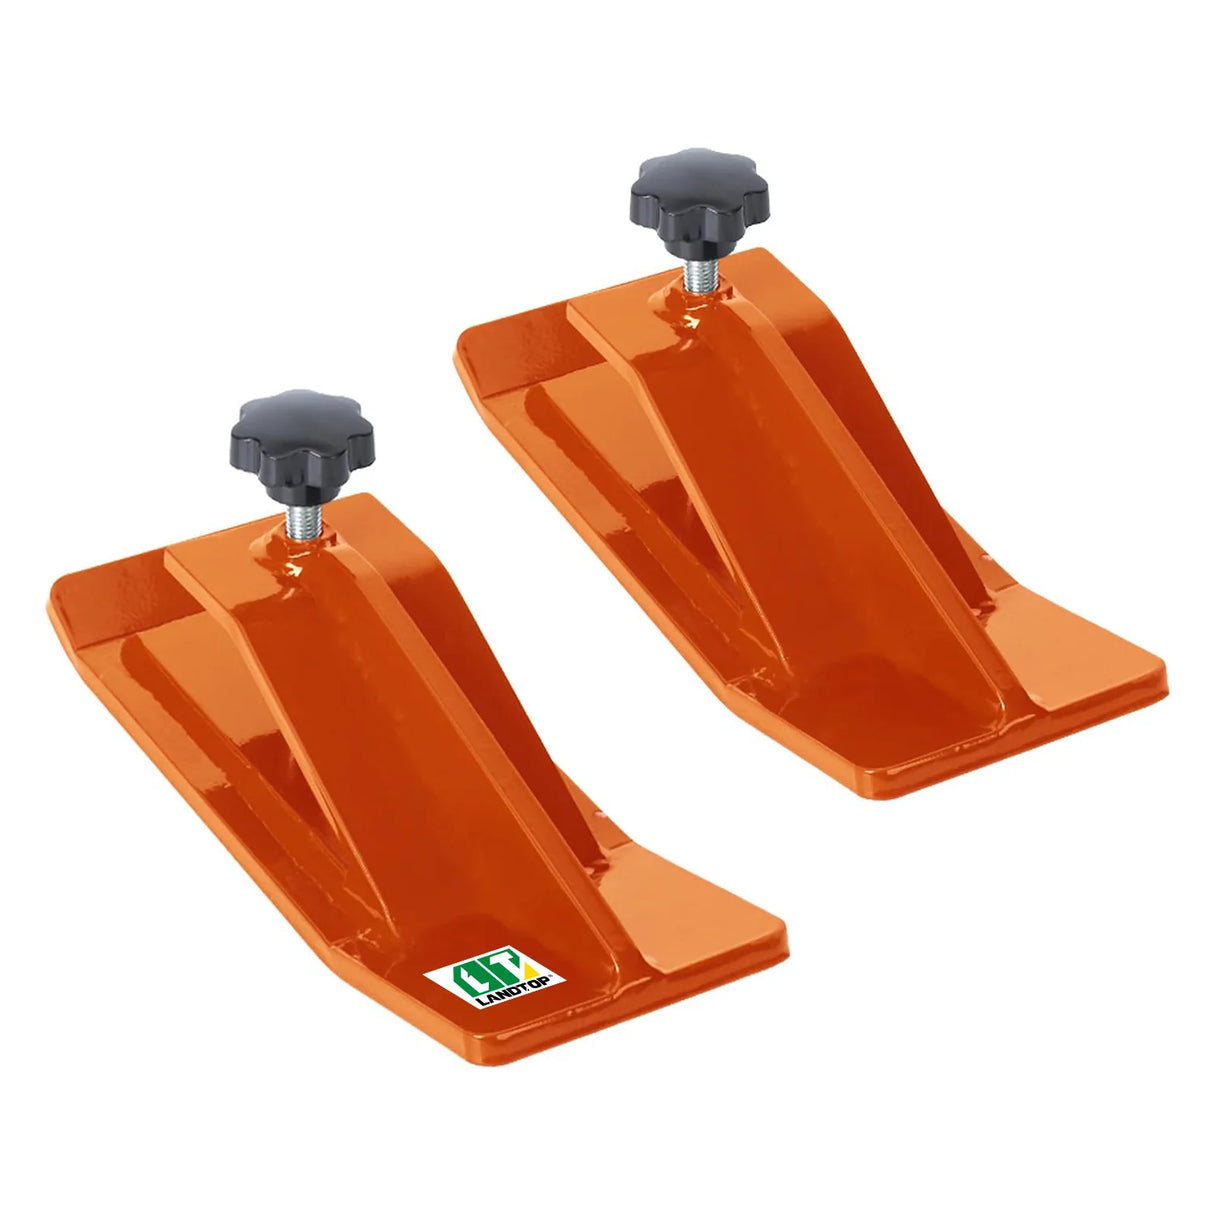 Tractor Bucket Protector, 2pcs Ski Edge Protector, Turf Tamer Skid Protector, Heavy Duty Steel Bucket Edge Anti-Skid Device, Bucket Attachment for Snow Leaves Removal Spreading Gravel, Orange